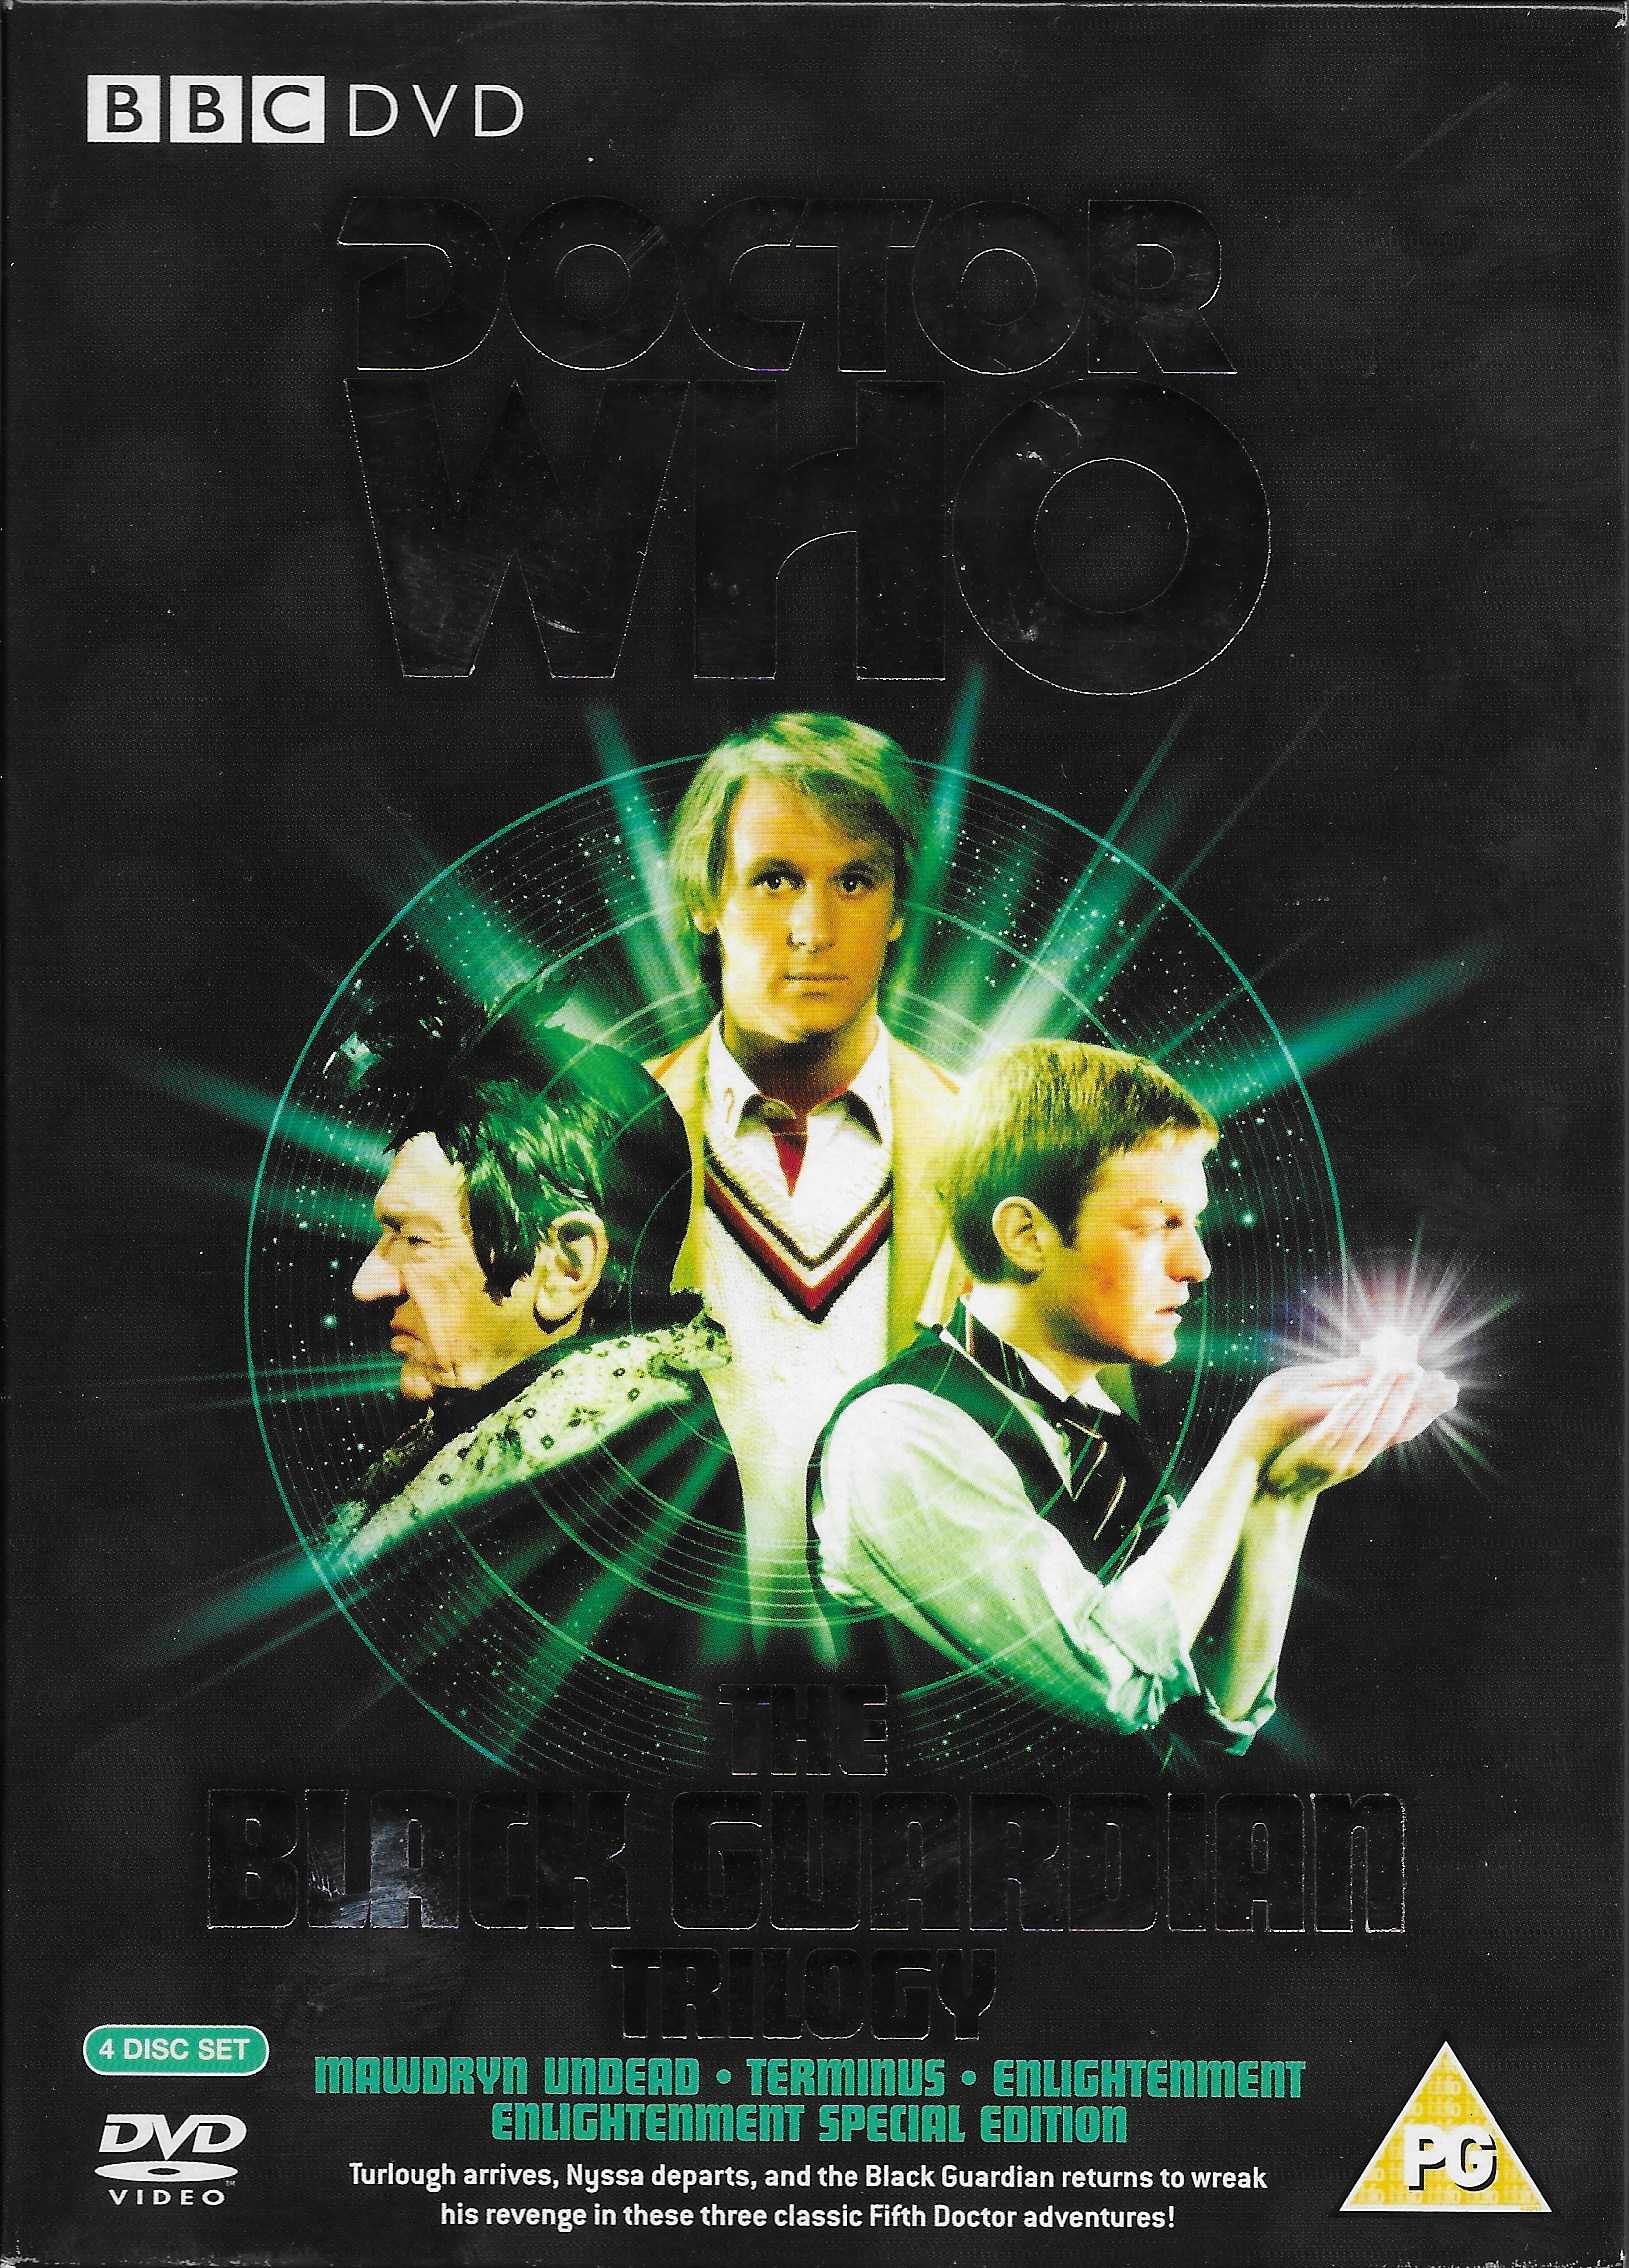 Picture of BBCDVD 2596 Doctor Who - The Black Guardian trilogy by artist Peter Grimwade / Steve Gallagher / Barbara Clegg from the BBC dvds - Records and Tapes library